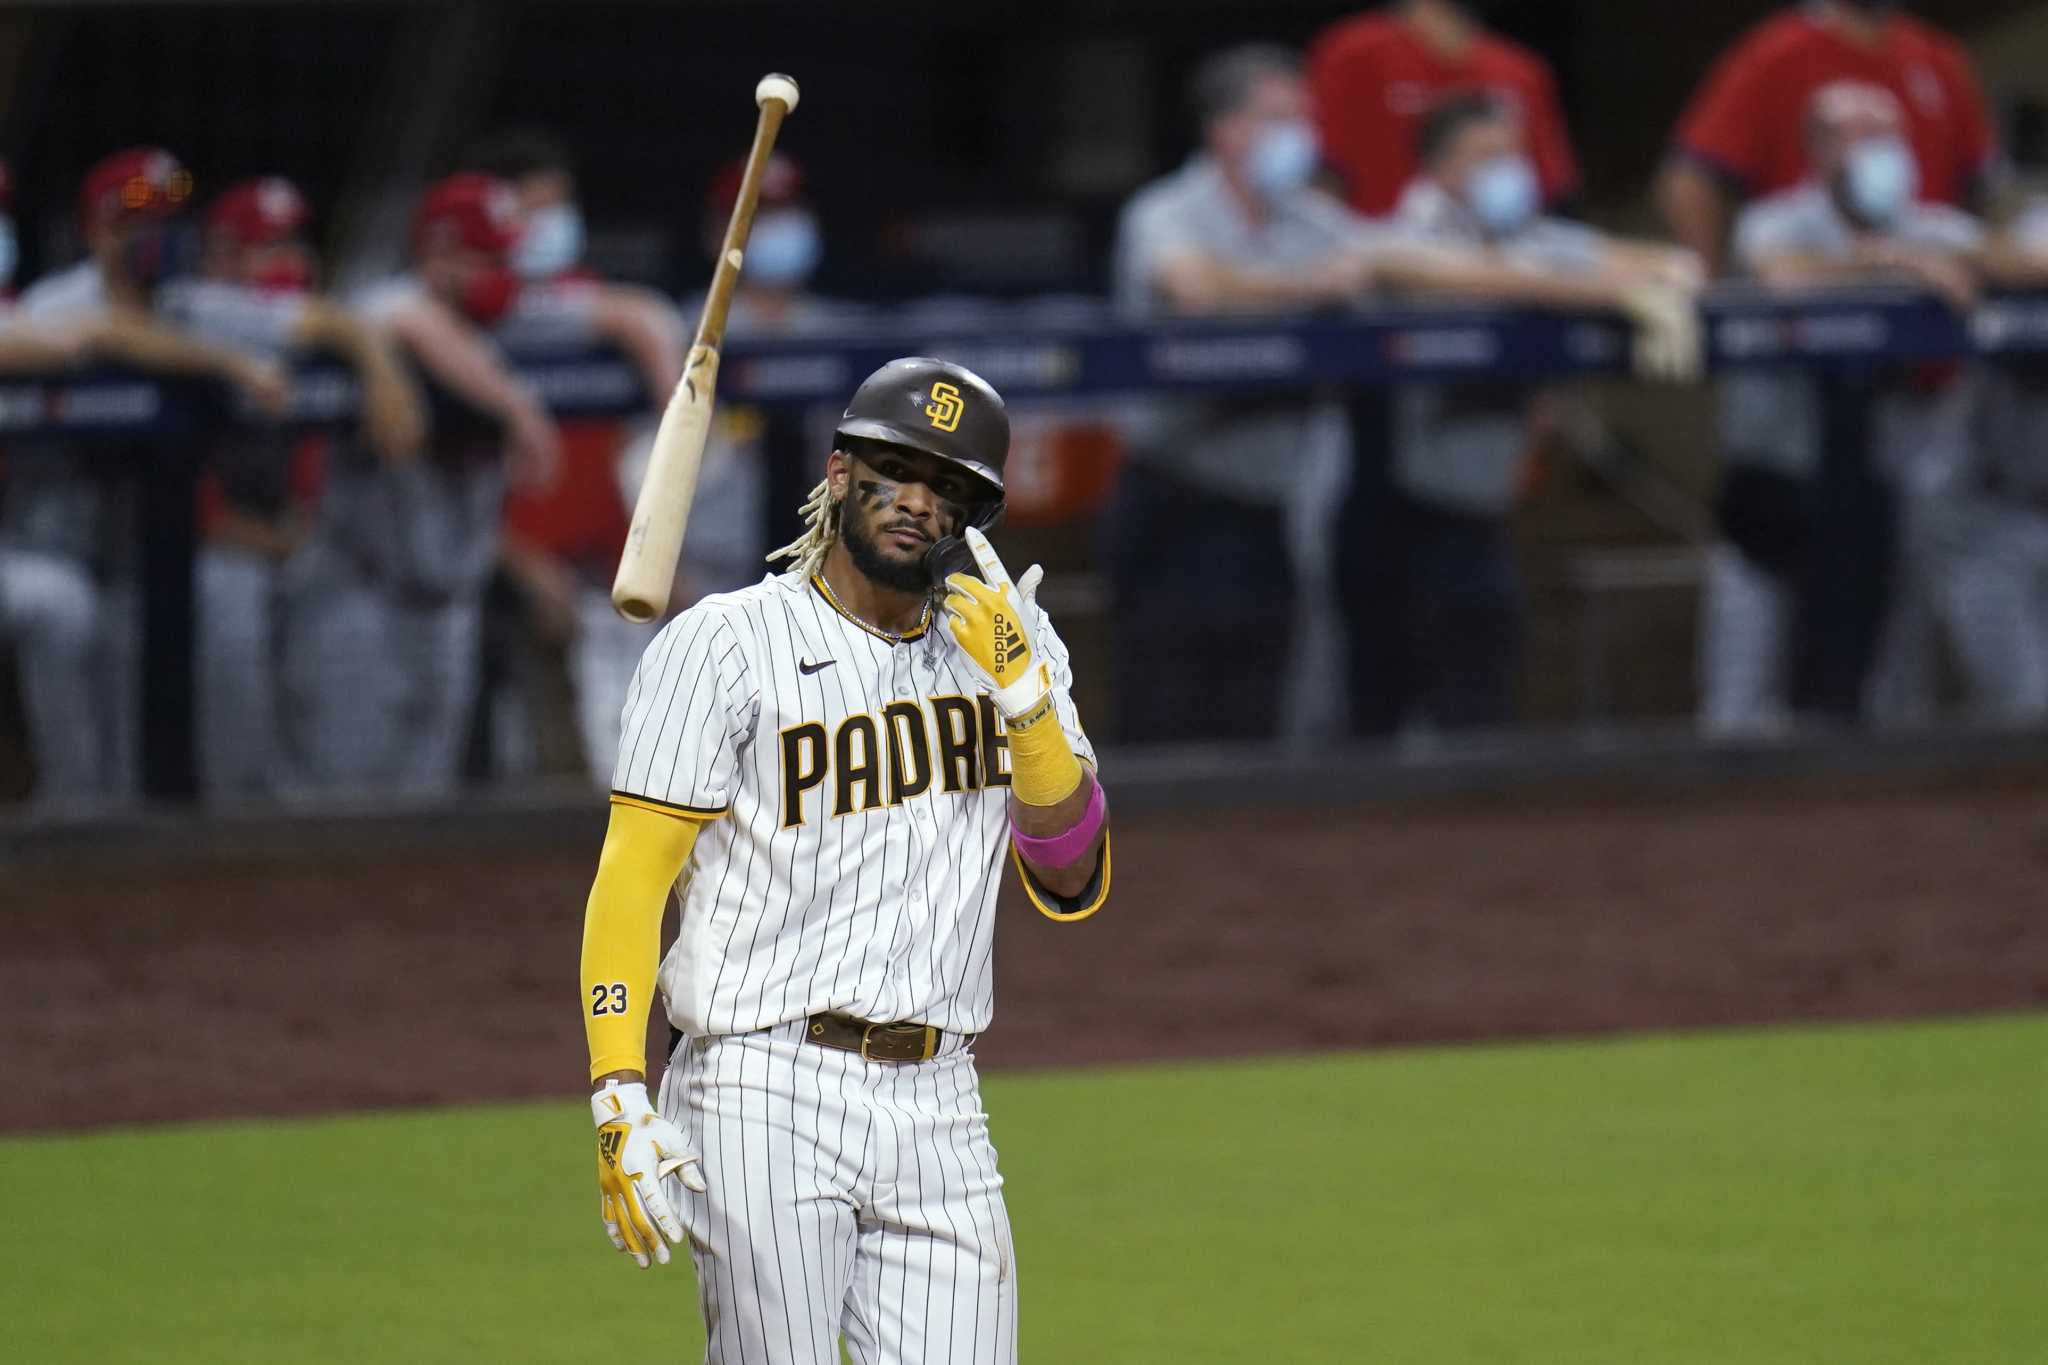 Tates, Myers Homer twice, and Padres keep alive with their 11-9 win